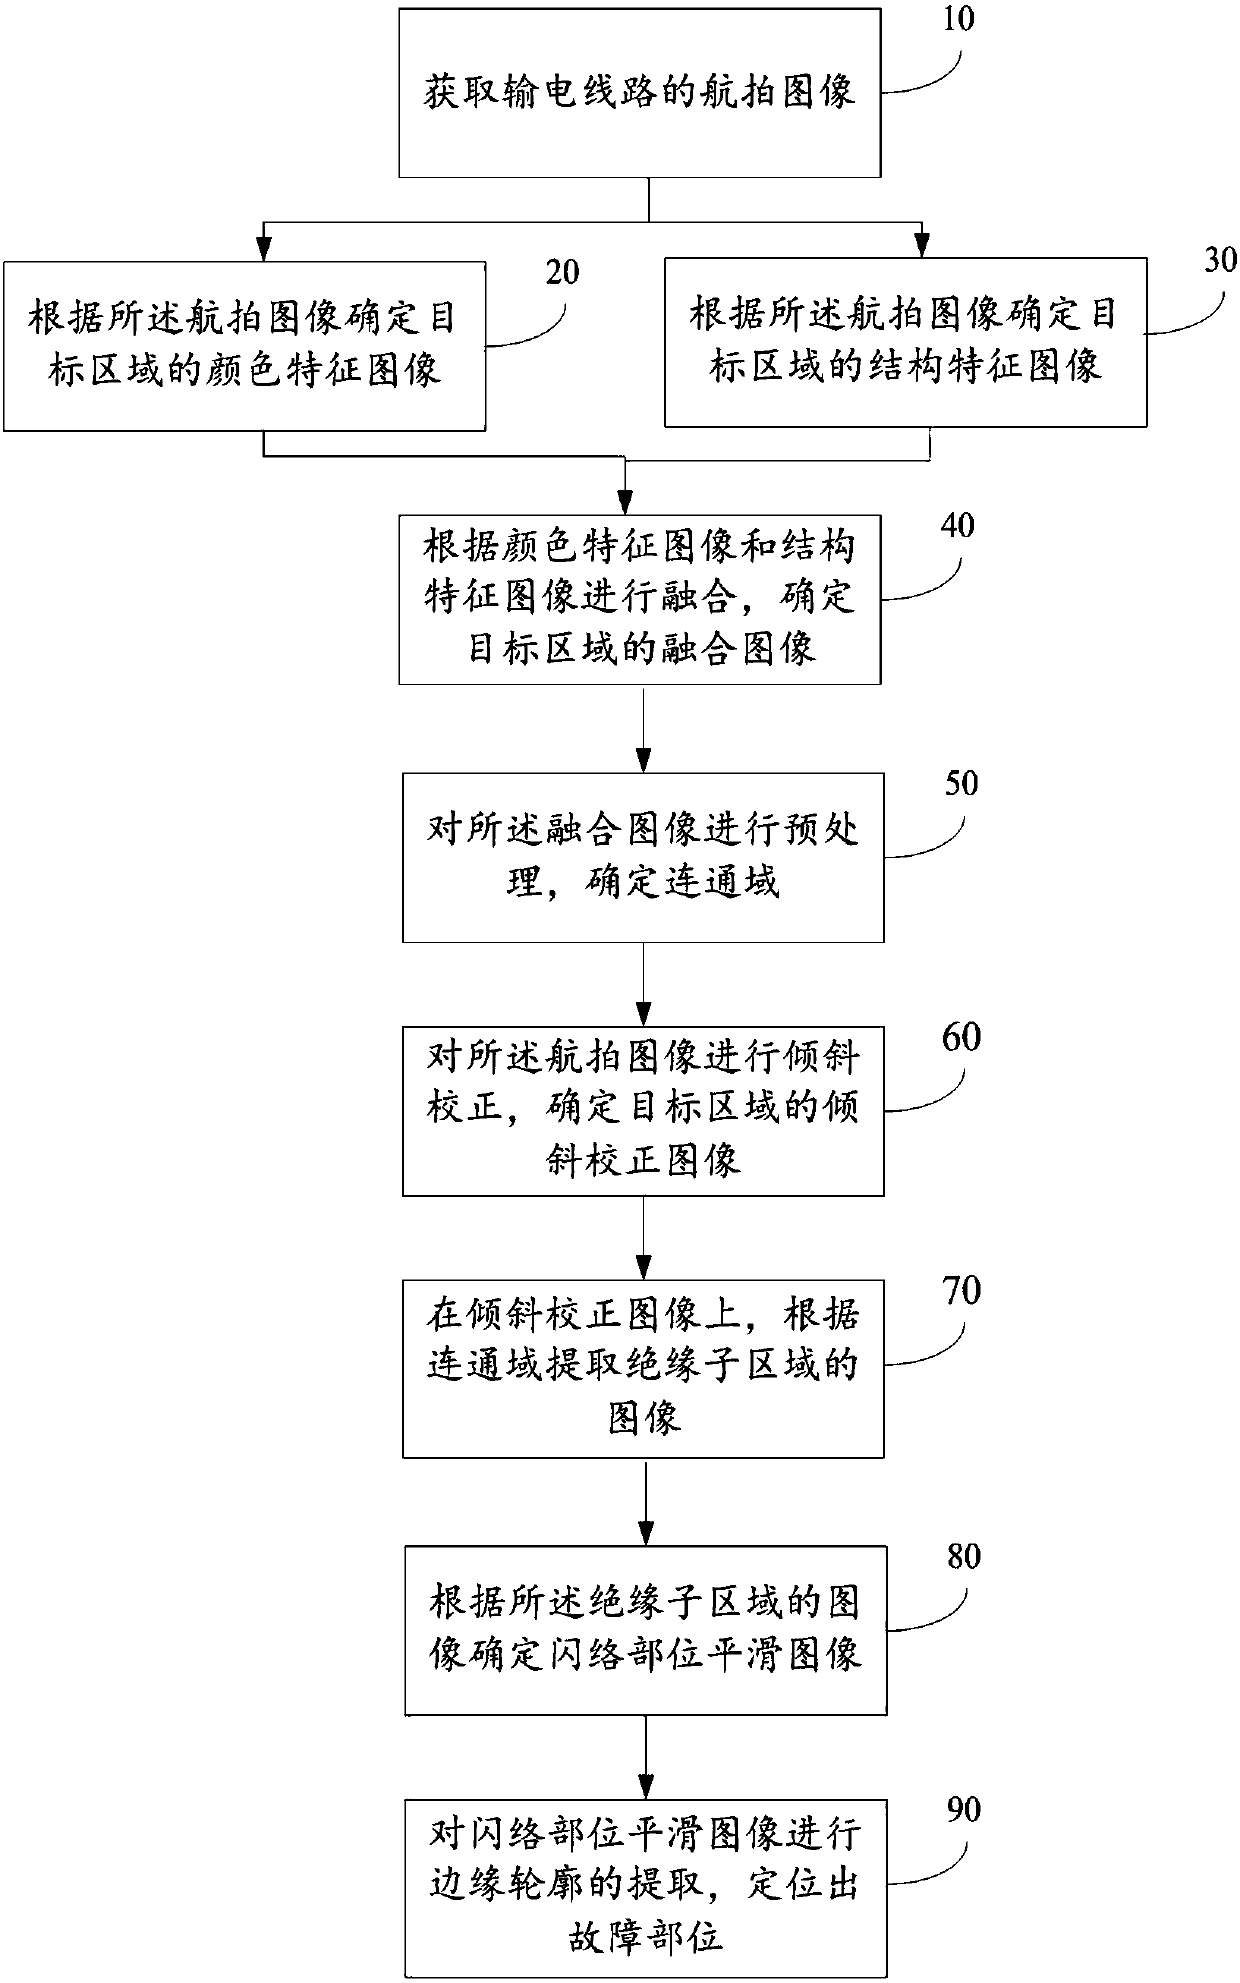 Insulator flashover fault localization method and system